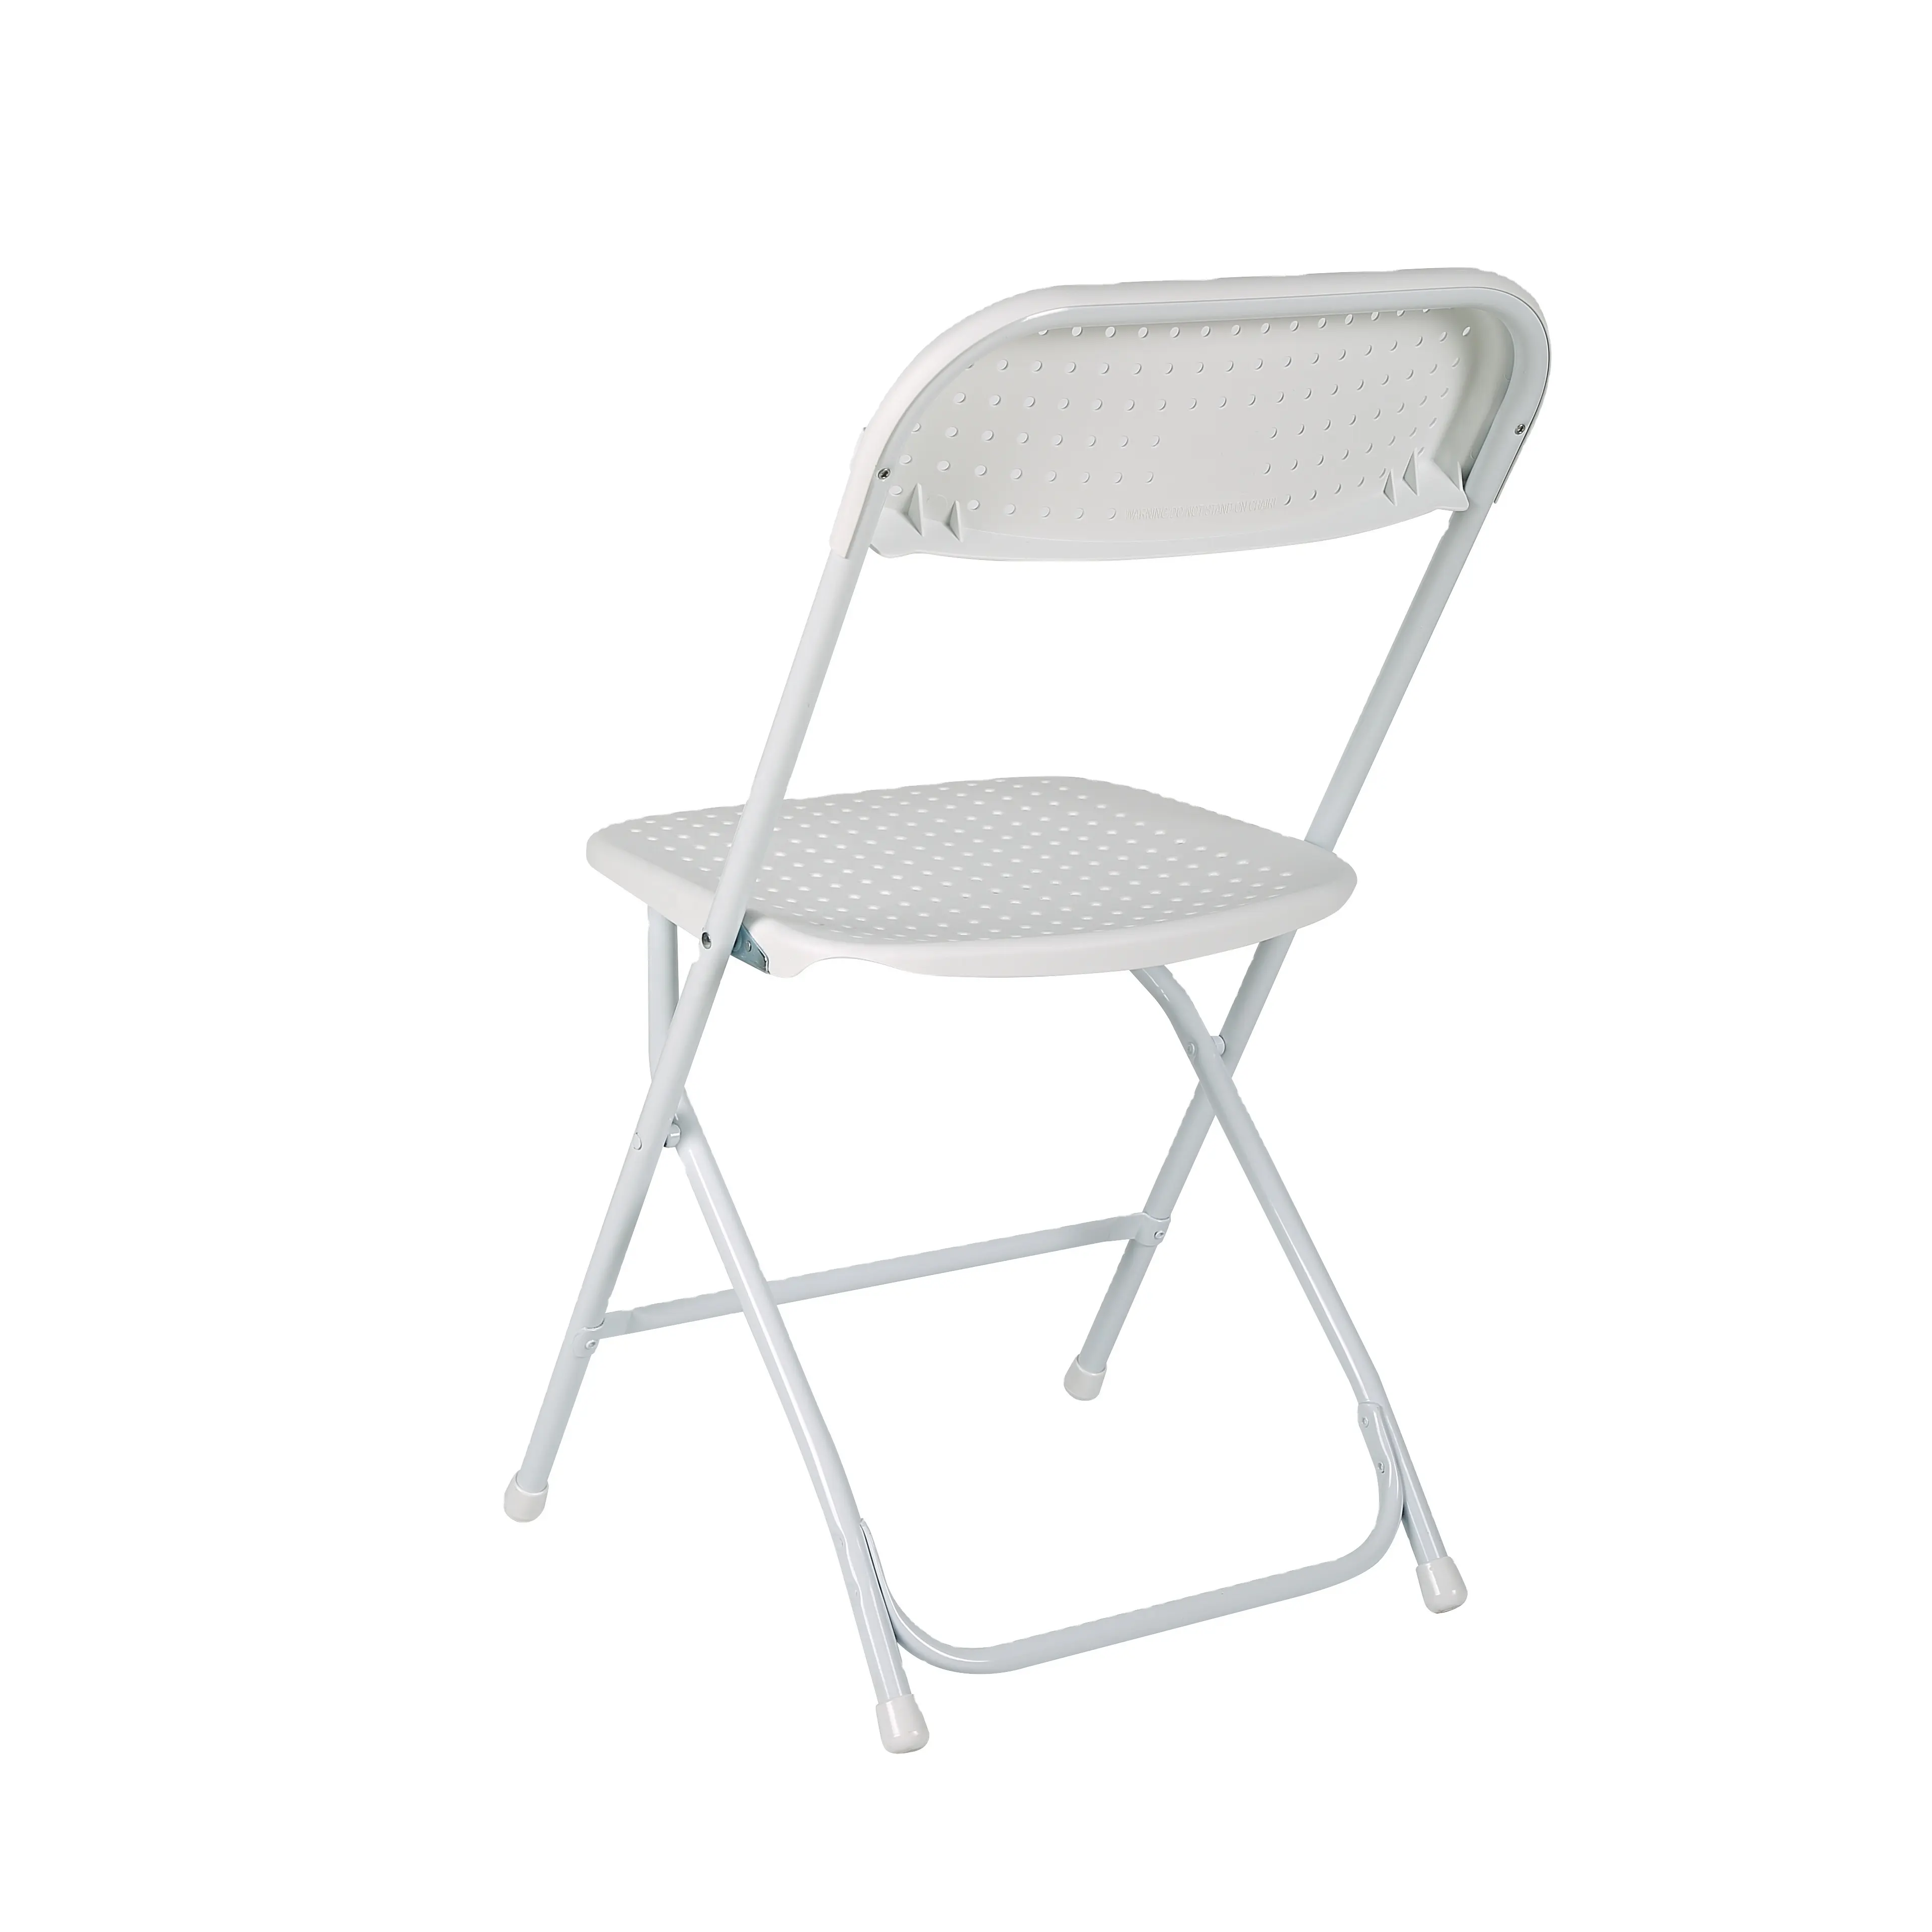 white /black plastic steel wedding bbq outdoor folding chair for event/party chair